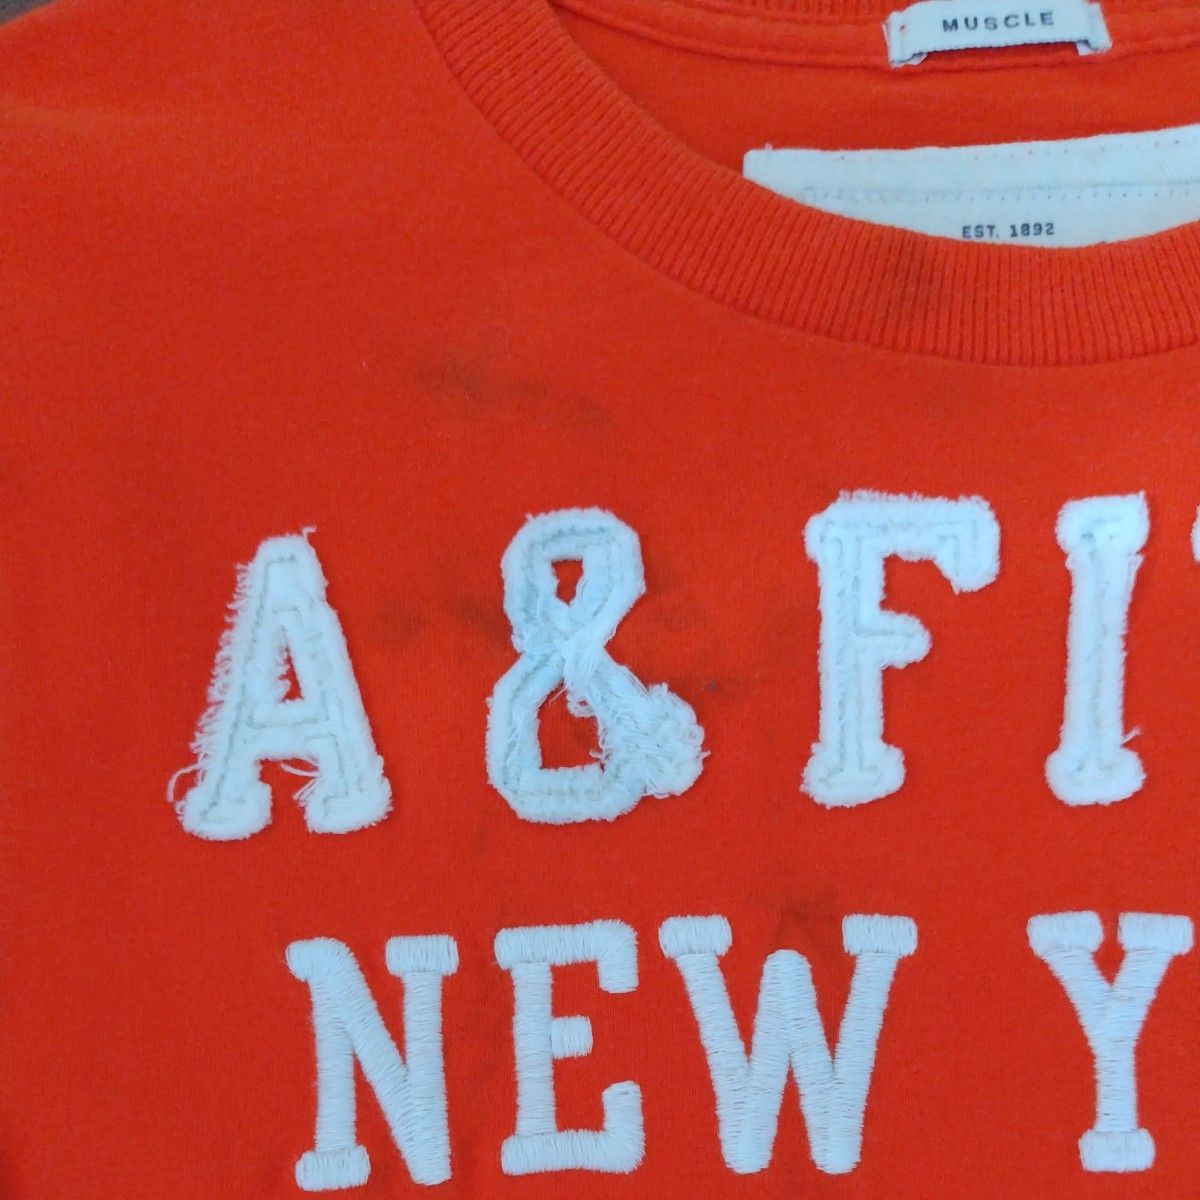 Abercrombie&Fitch Tシャツ